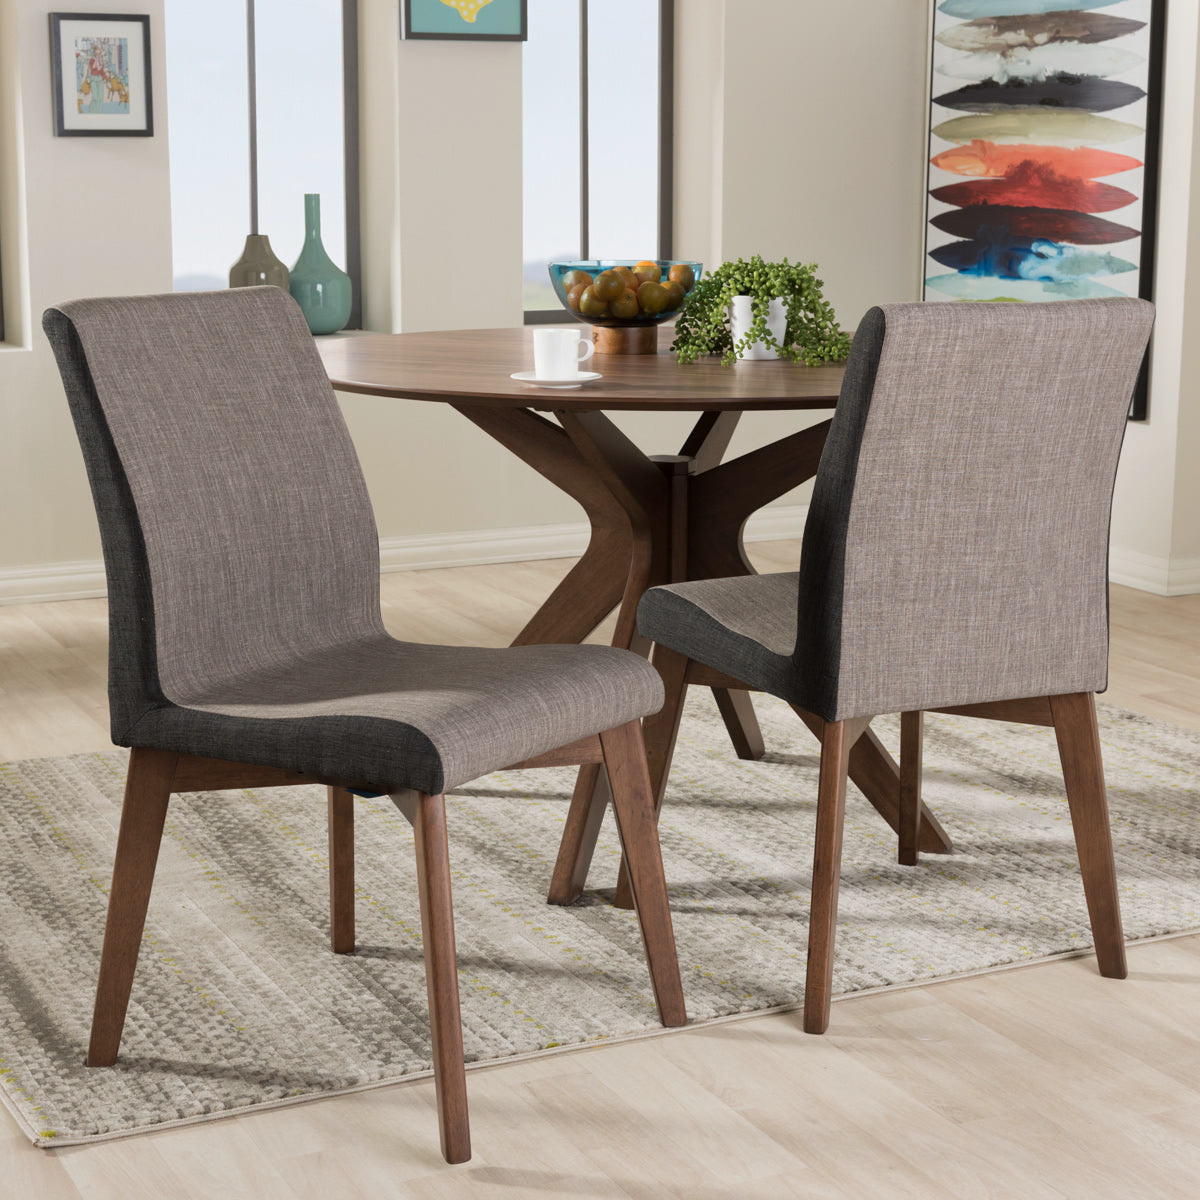 Baxton Studio Kimberly Mid-Century Modern Beige and Brown Fabric Dining Chair (Set of 2) Baxton Studio-dining chair-Minimal And Modern - 1